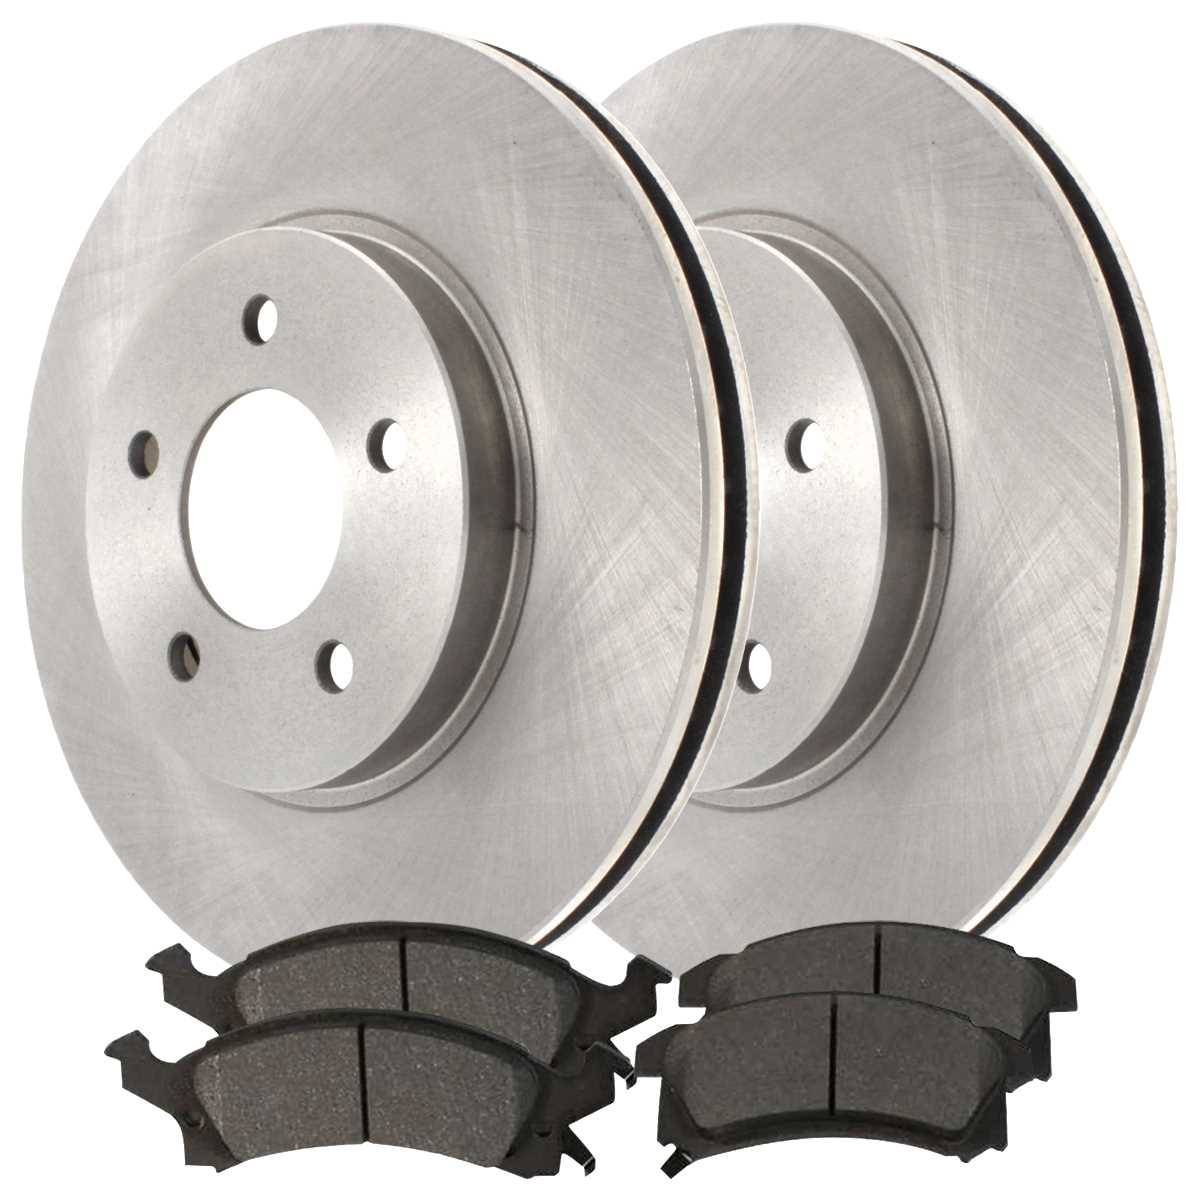 Edge MKX 5lug SHIPS FROM USA!!-Tax Incl. 2 OEM Replacement Extra-Life Heavy Duty Brake Rotors -Combo Brake Kit- 4 Ceramic Pads Front Kit